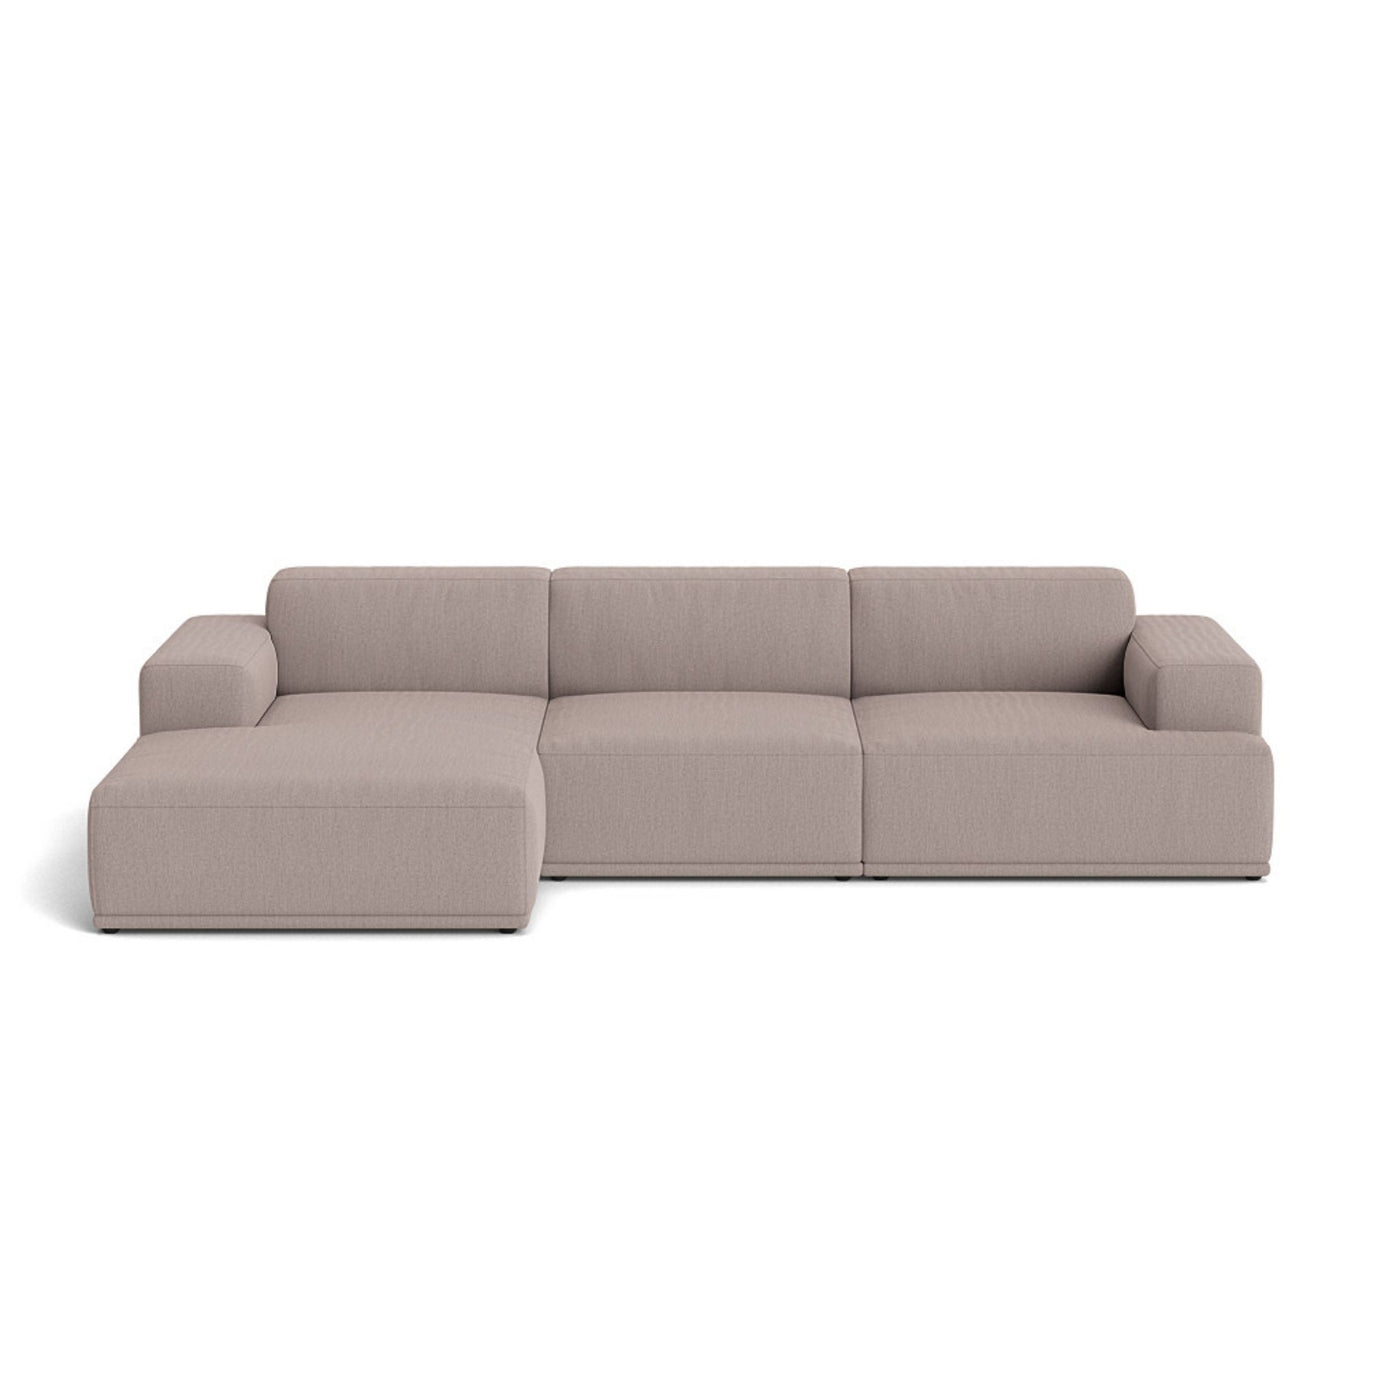 Muuto Connect Soft Modular 3 Seater Sofa, configuration 2. Made-to-order from someday designs. #colour_re-wool-628